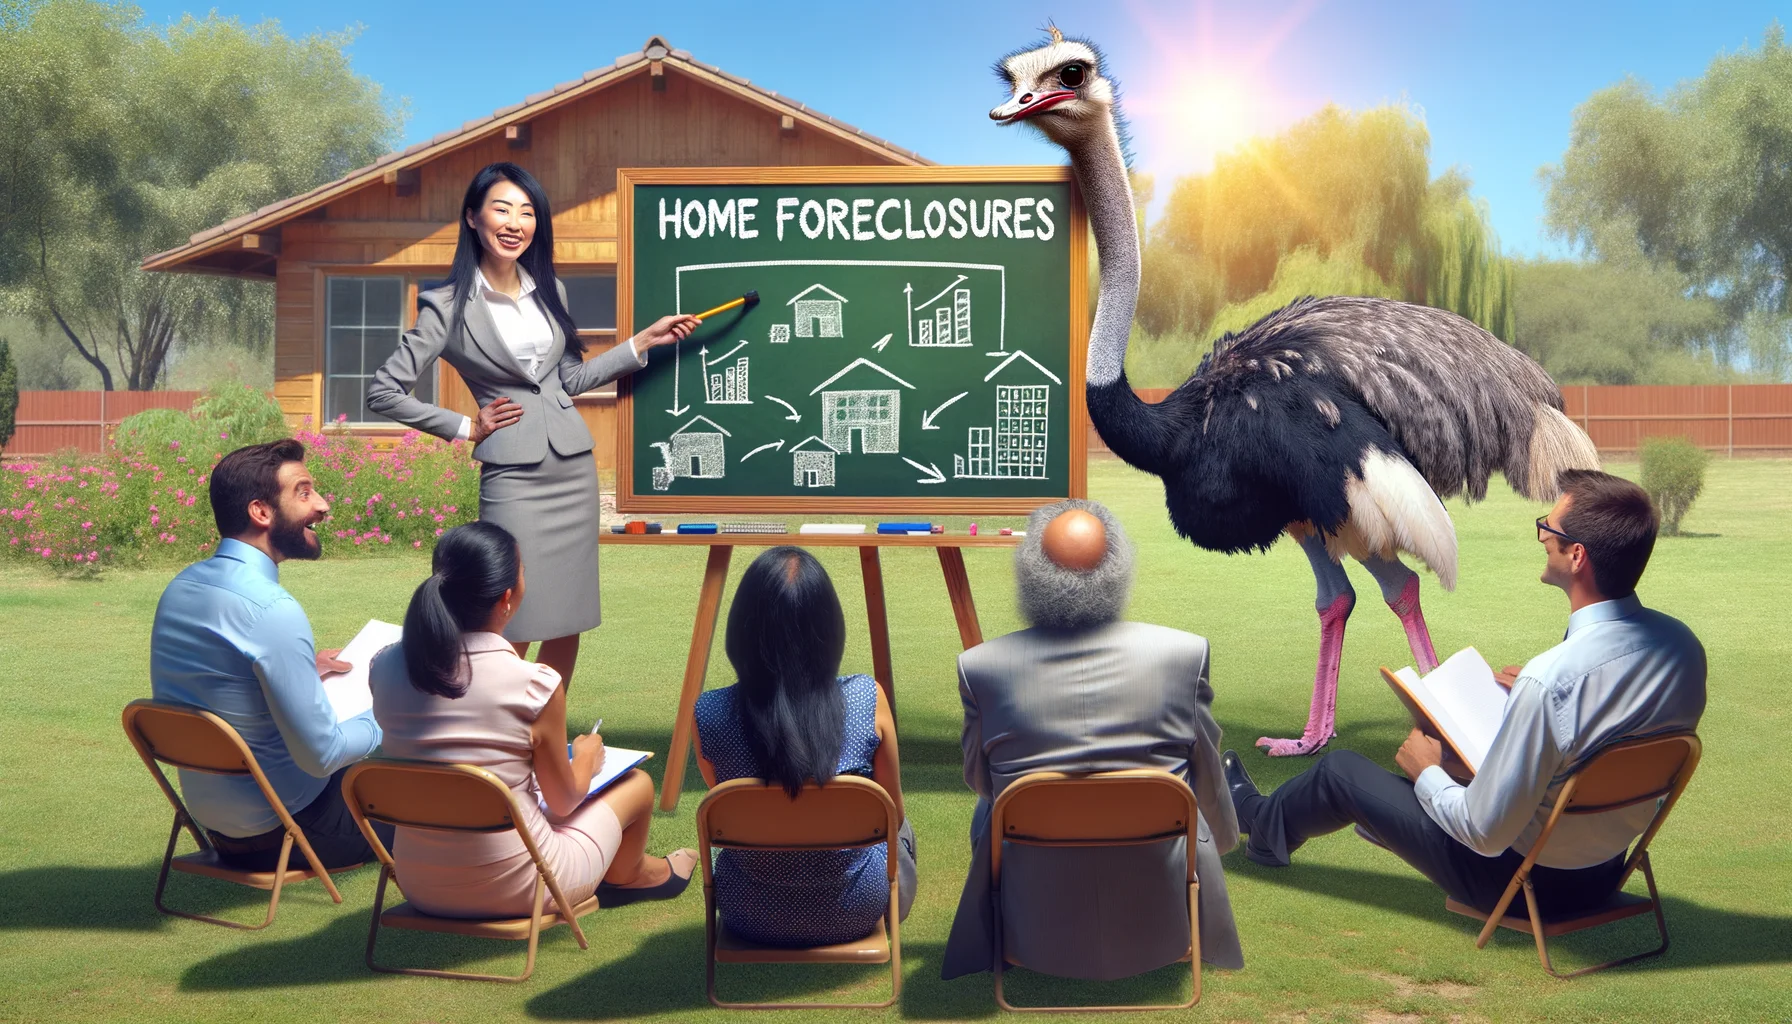 Generate a humorous yet realistic image that depicts 'Understanding Home Foreclosures' in a perfect scenario. The scene is a brightly lit outdoor setting, with a group of people attending an outdoor class. The instructor, an East Asian woman, is energetically explaining foreclosure concepts with the help of a blackboard. The audience includes a Middle-Eastern man in his 30s, a Caucasian woman in her 40s, and a South Asian youngster. All are laughing while taking notes. The humor element is represented by a nearby ostrich that's humorously peeking over the blackboard taking a look at the diagrams.